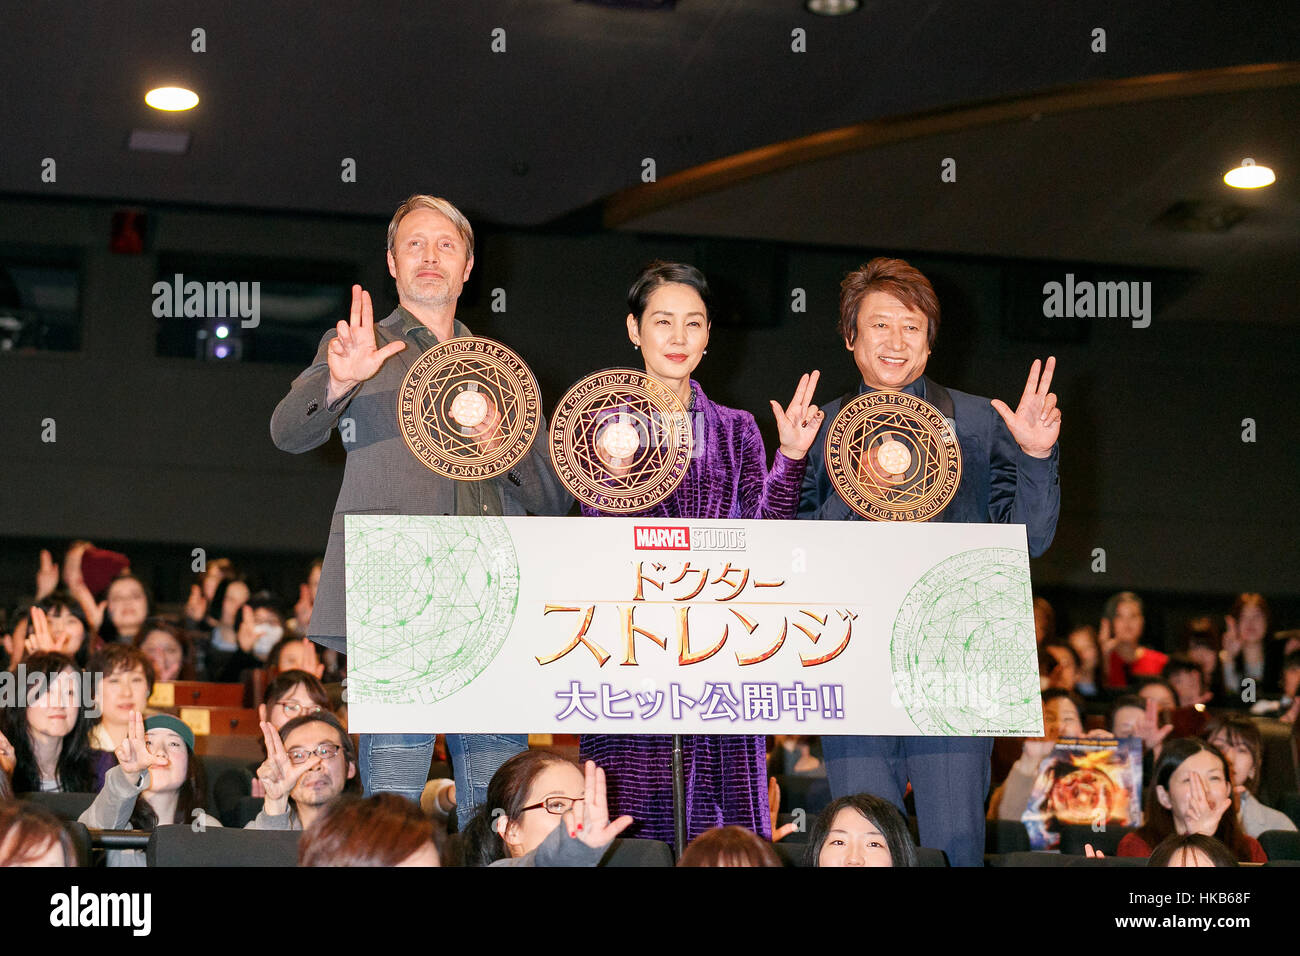 Tokyo, Japan. 27th Jan, 2017. (L to R) Danish actor Mads Mikkelsen, actress Kanako Higuchi and voice actor Kazuhiko Inoue, pose for cameras during a press conference for the film 'Doctor Strange' in Tokyo, Japan. Mikkelsen plays the villain Kaecilius in the Marvel Comics movie starring superhero 'Doctor Strange' played by Benedict Cumberbatch. The film recently earned an Oscar nomination for Best Visual Effects and opens in Japan on January 27. Credit: Rodrigo Reyes Marin/AFLO/Alamy Live News Stock Photo